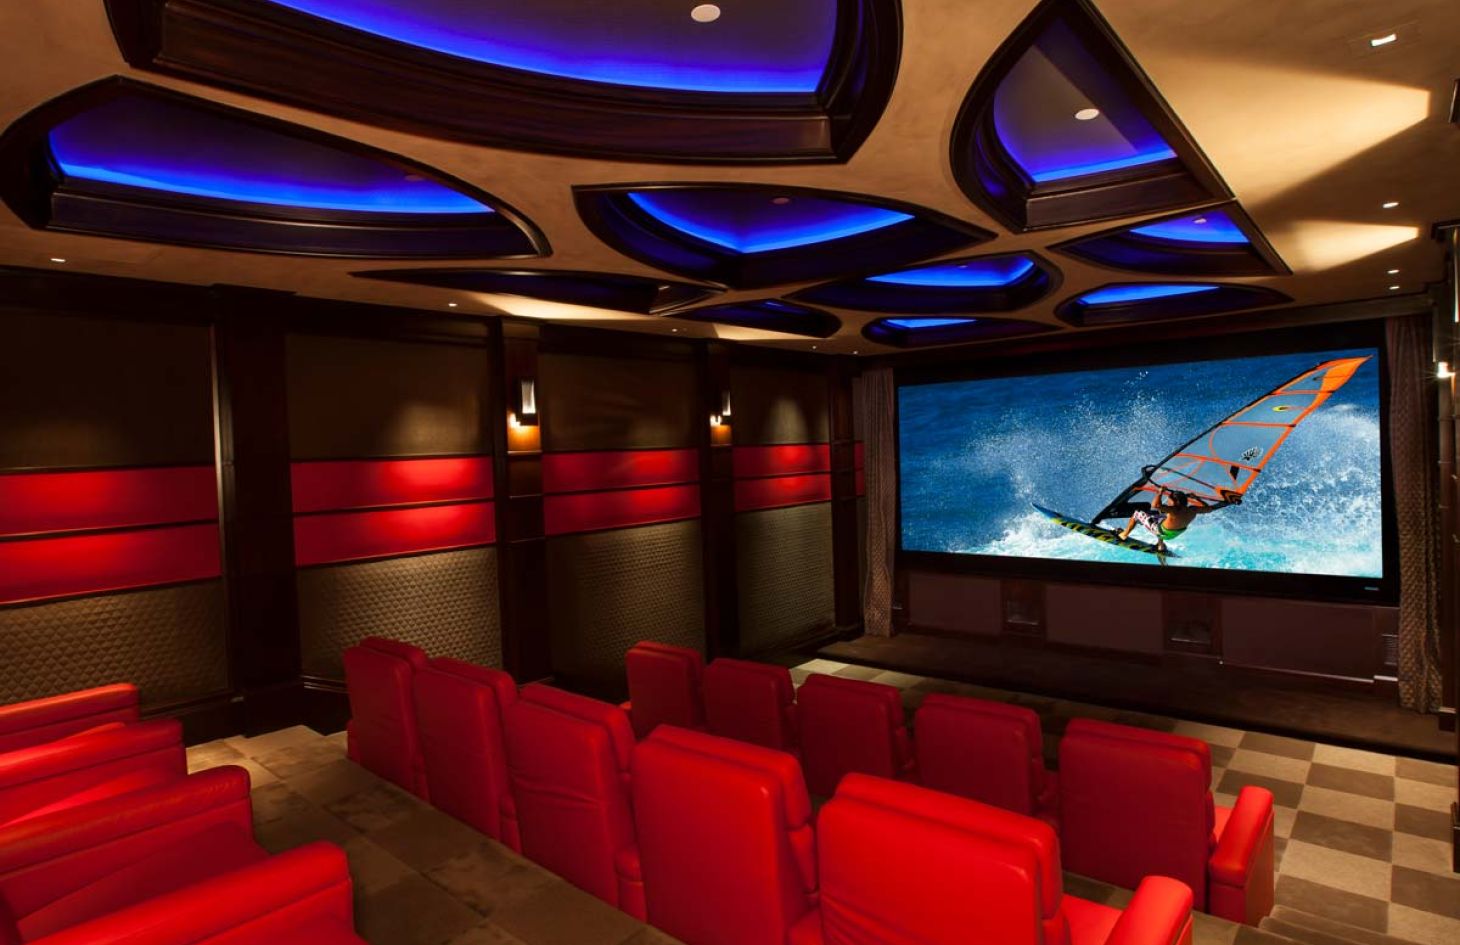 Home Theater Design, Red Seating, LED Lighting, Future Home